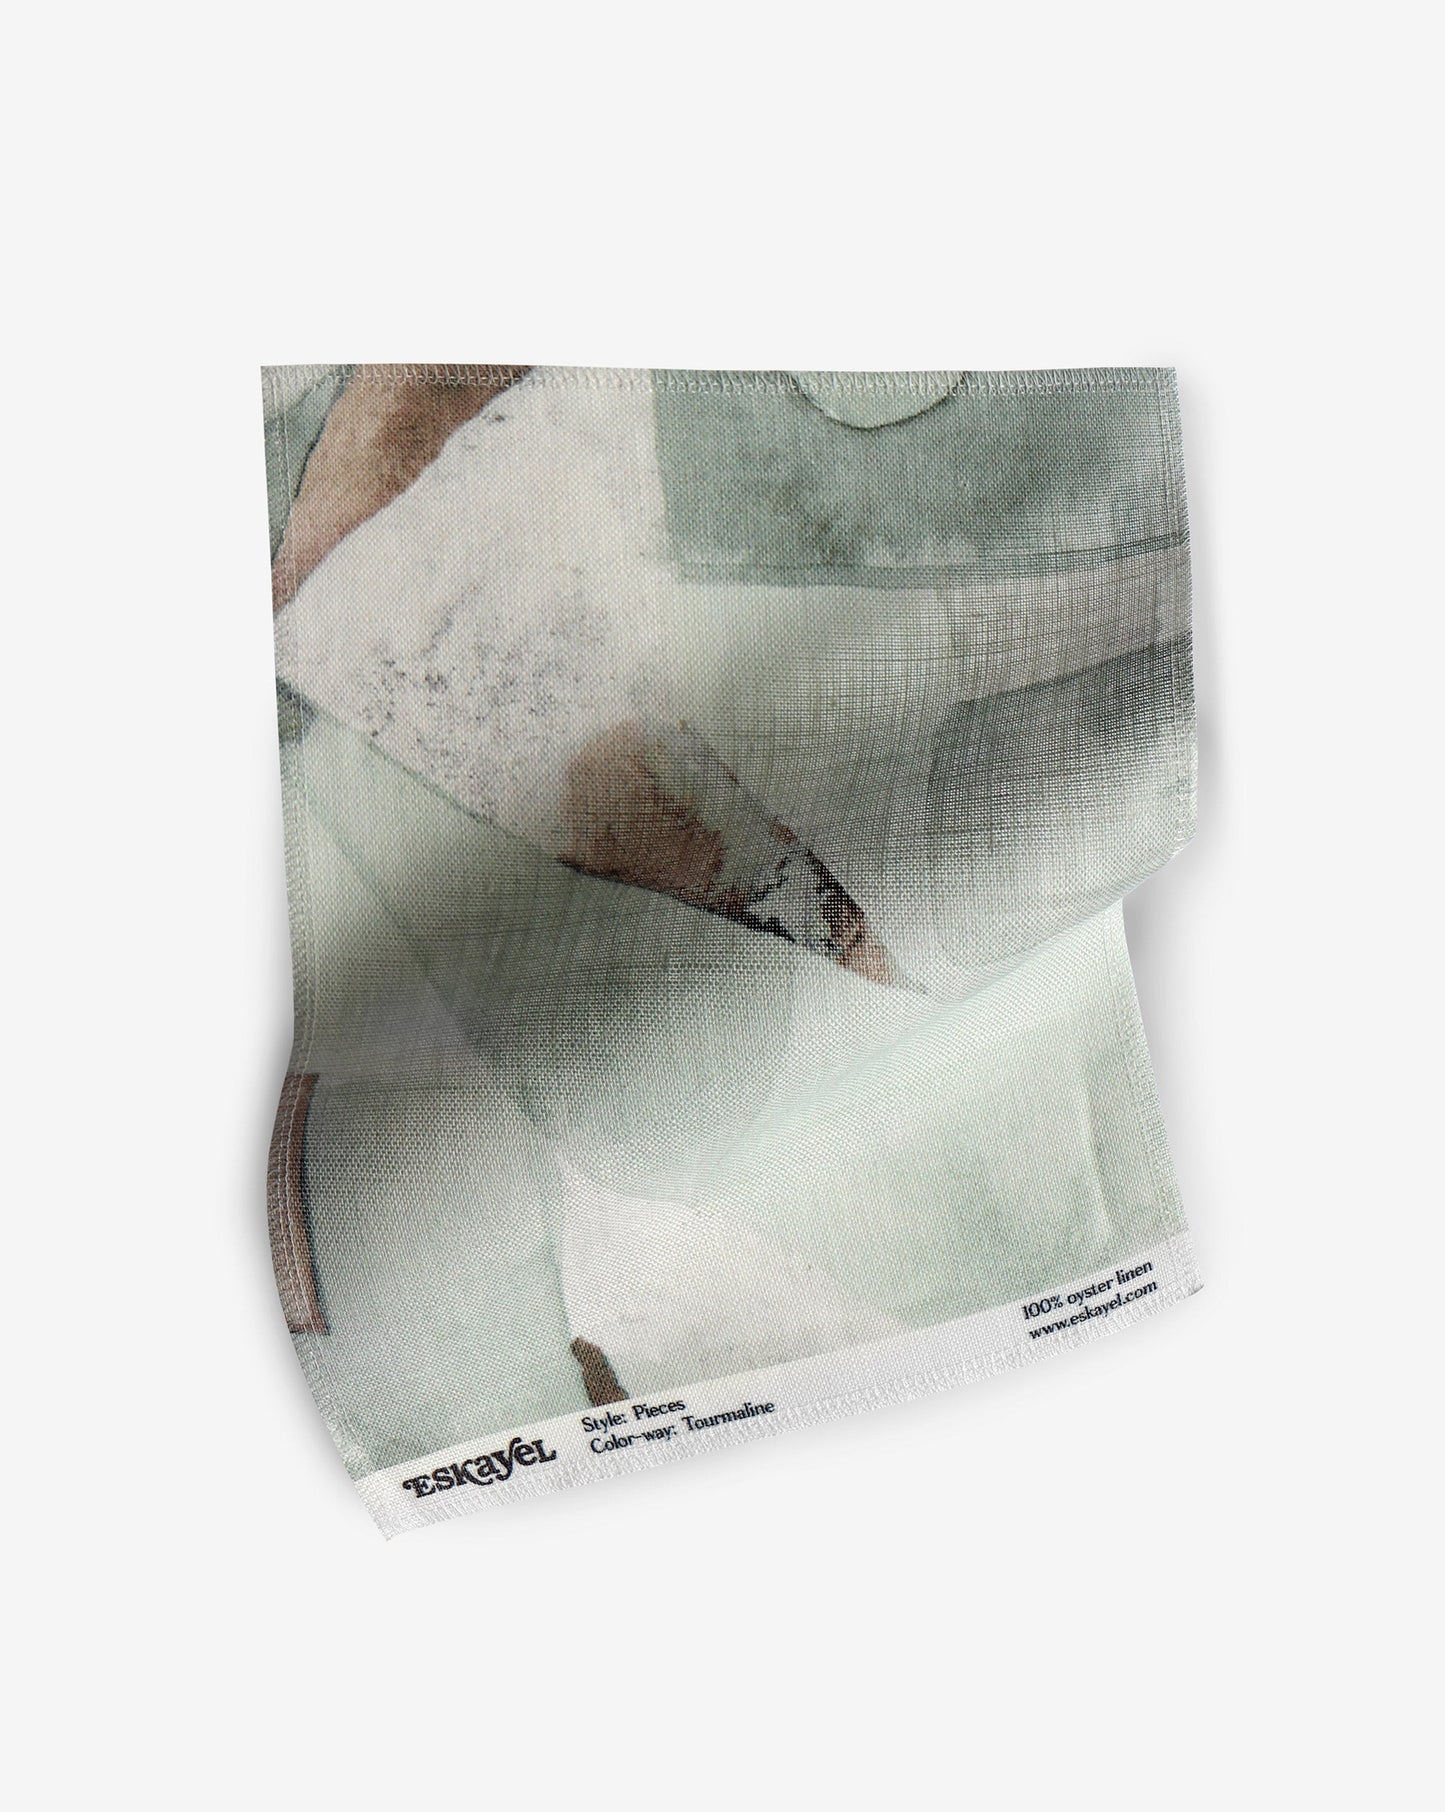 A fabric with our pieces pattern in tourmaline featuring a color blocked design of puzzle pieces in shades of green and a rusty brown throughout.